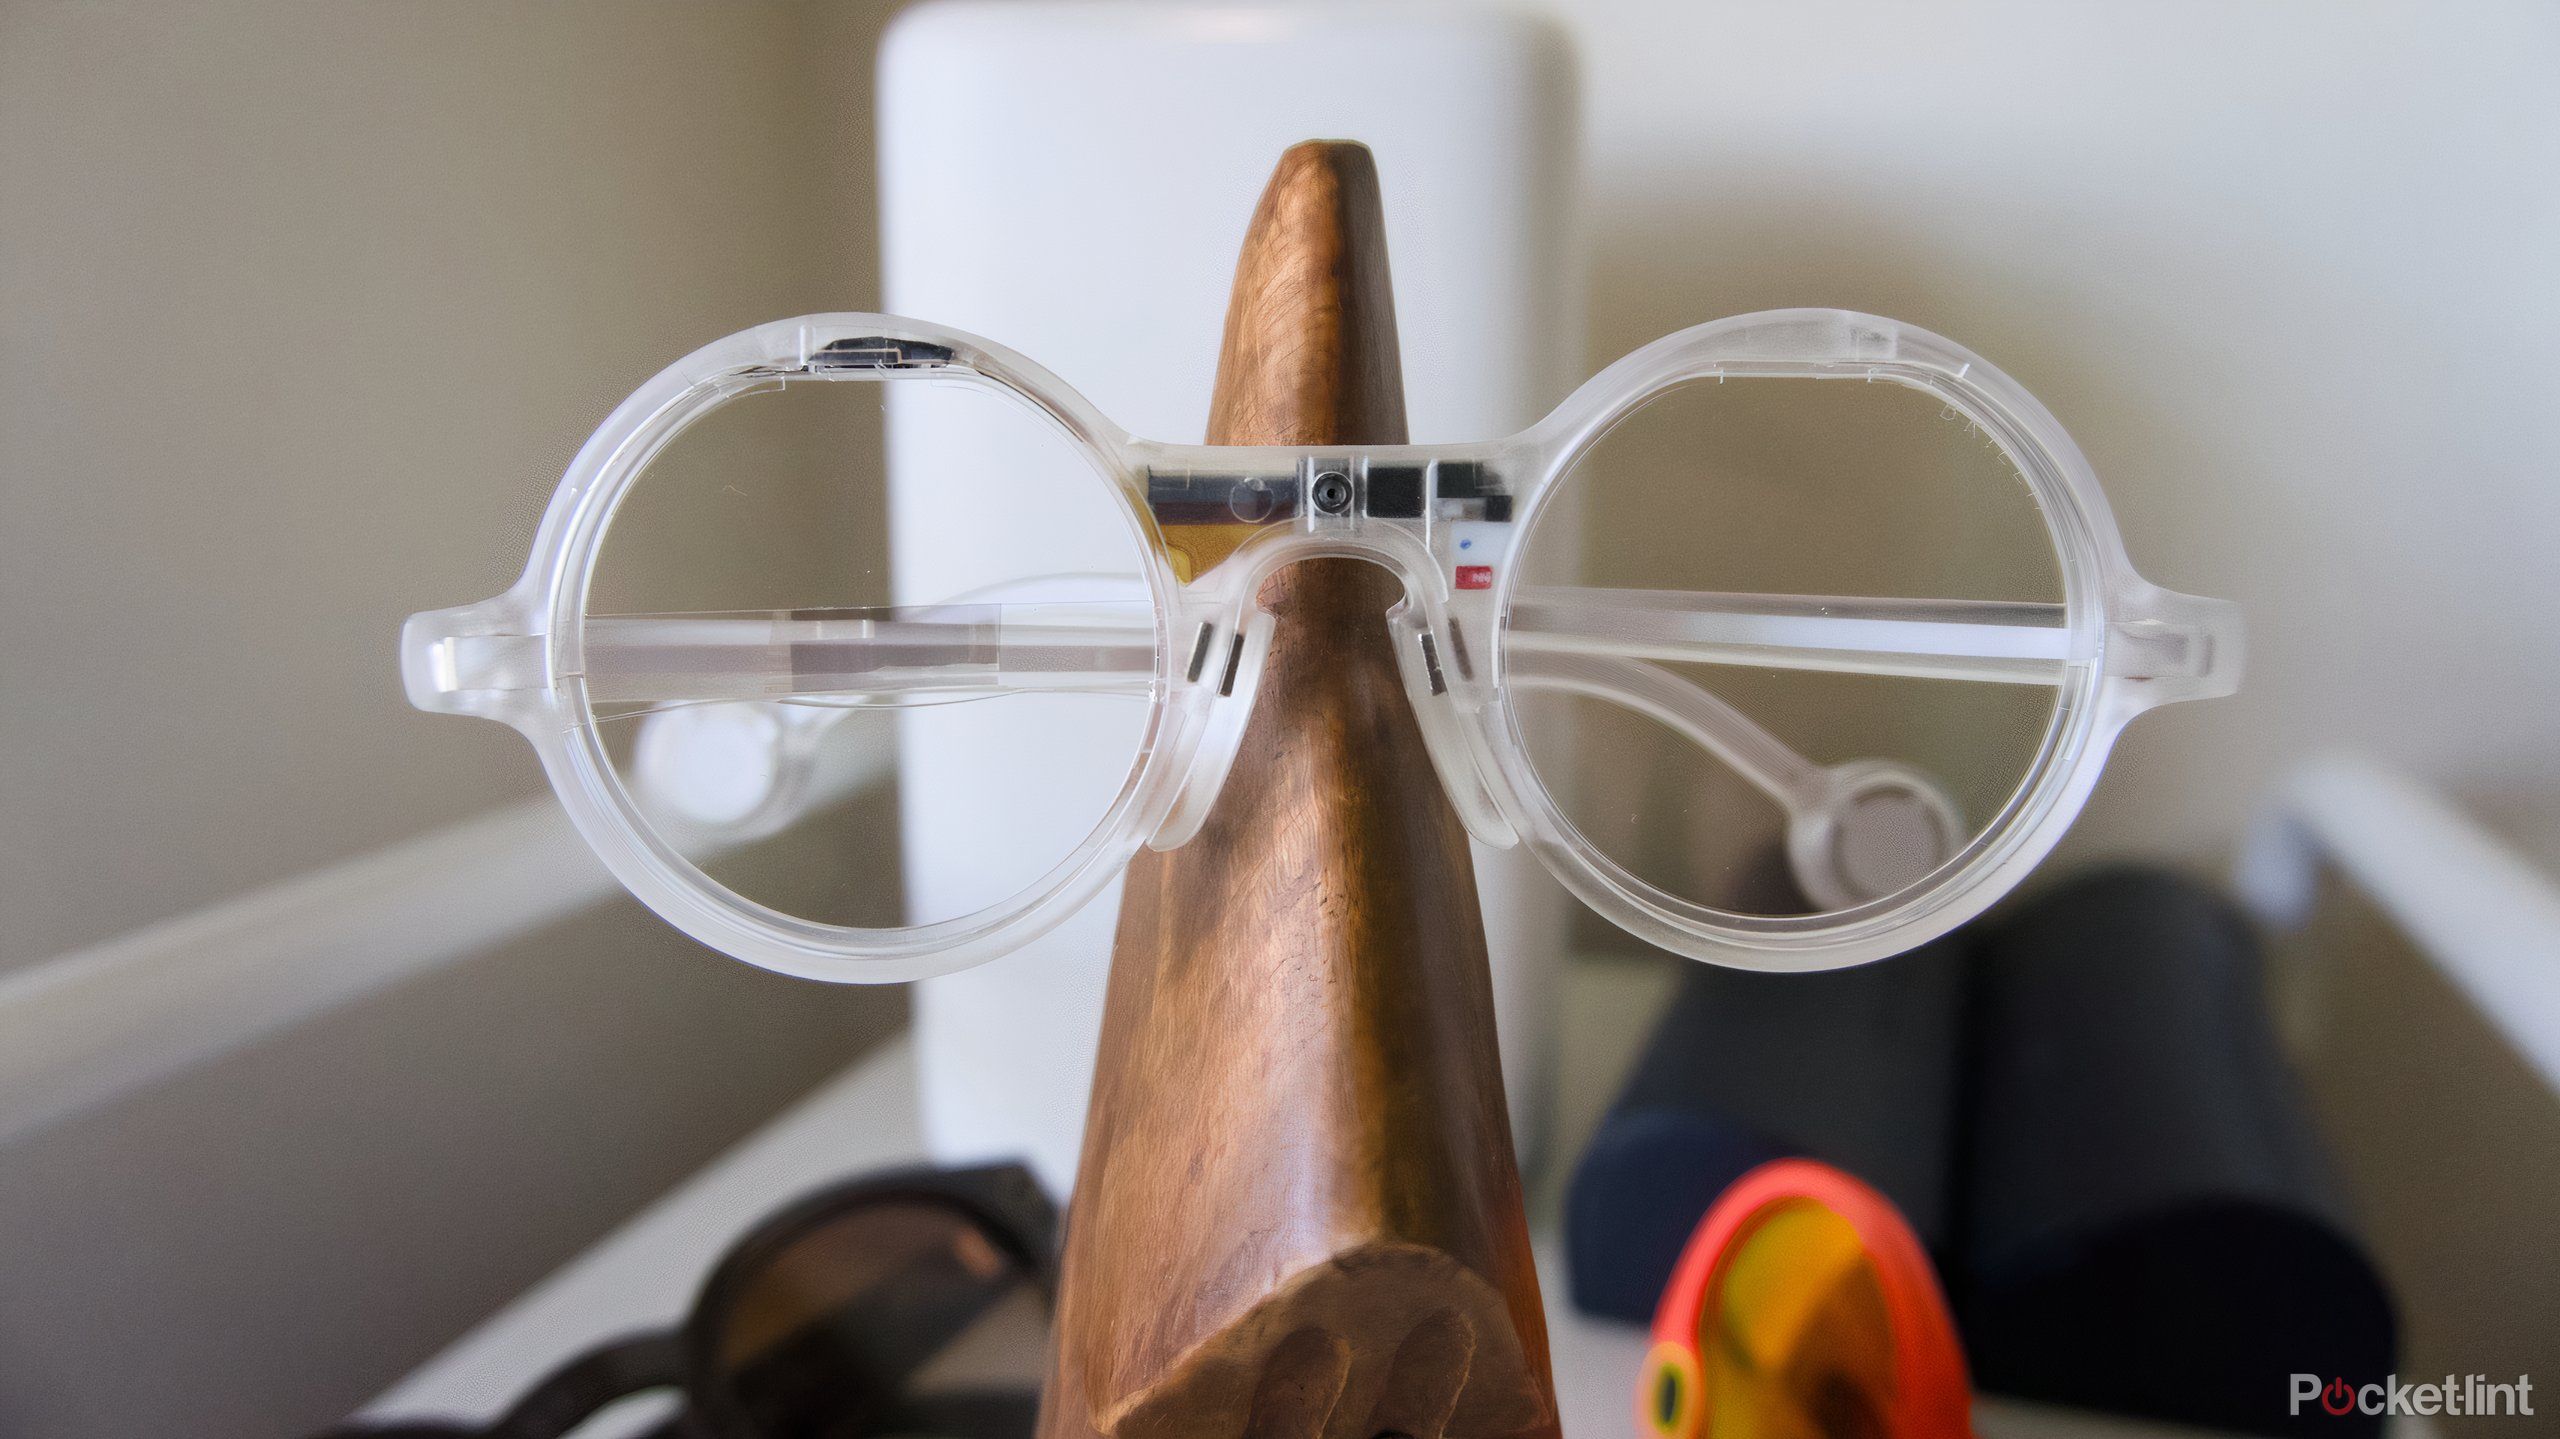 The Frame glasses mounted on a wooden nose.